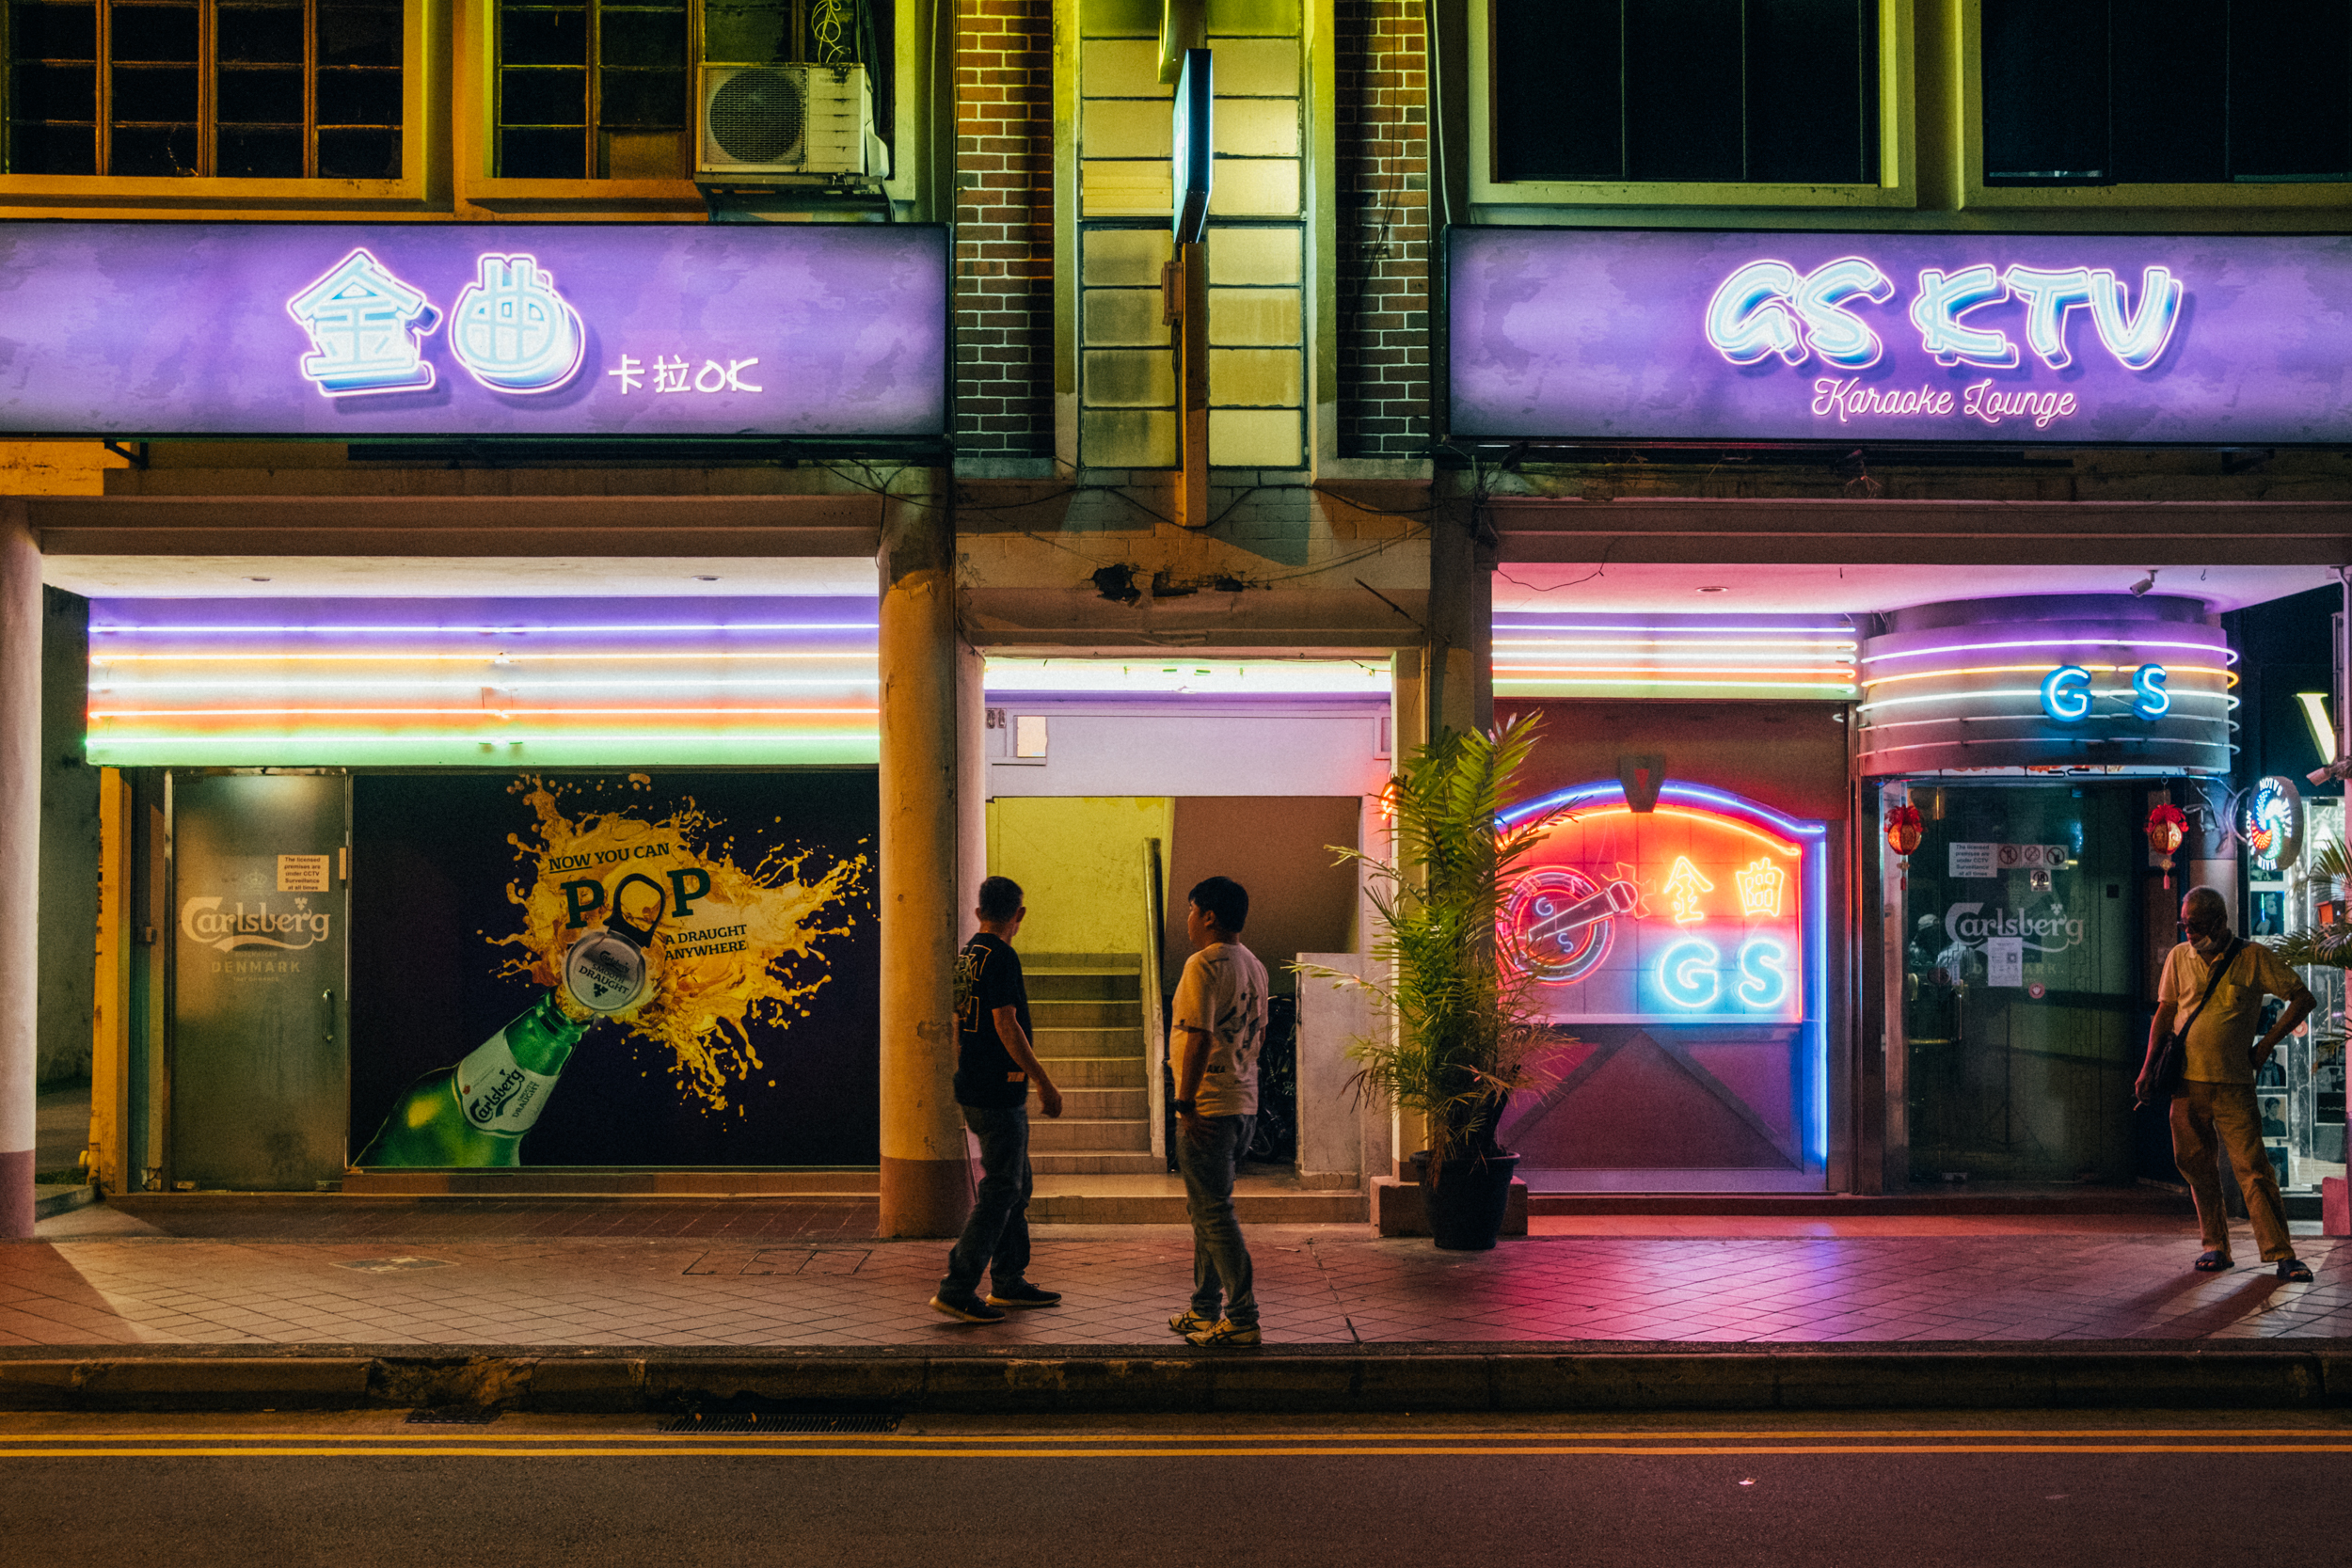 Image of people standing in front of bar in Joo Chiat